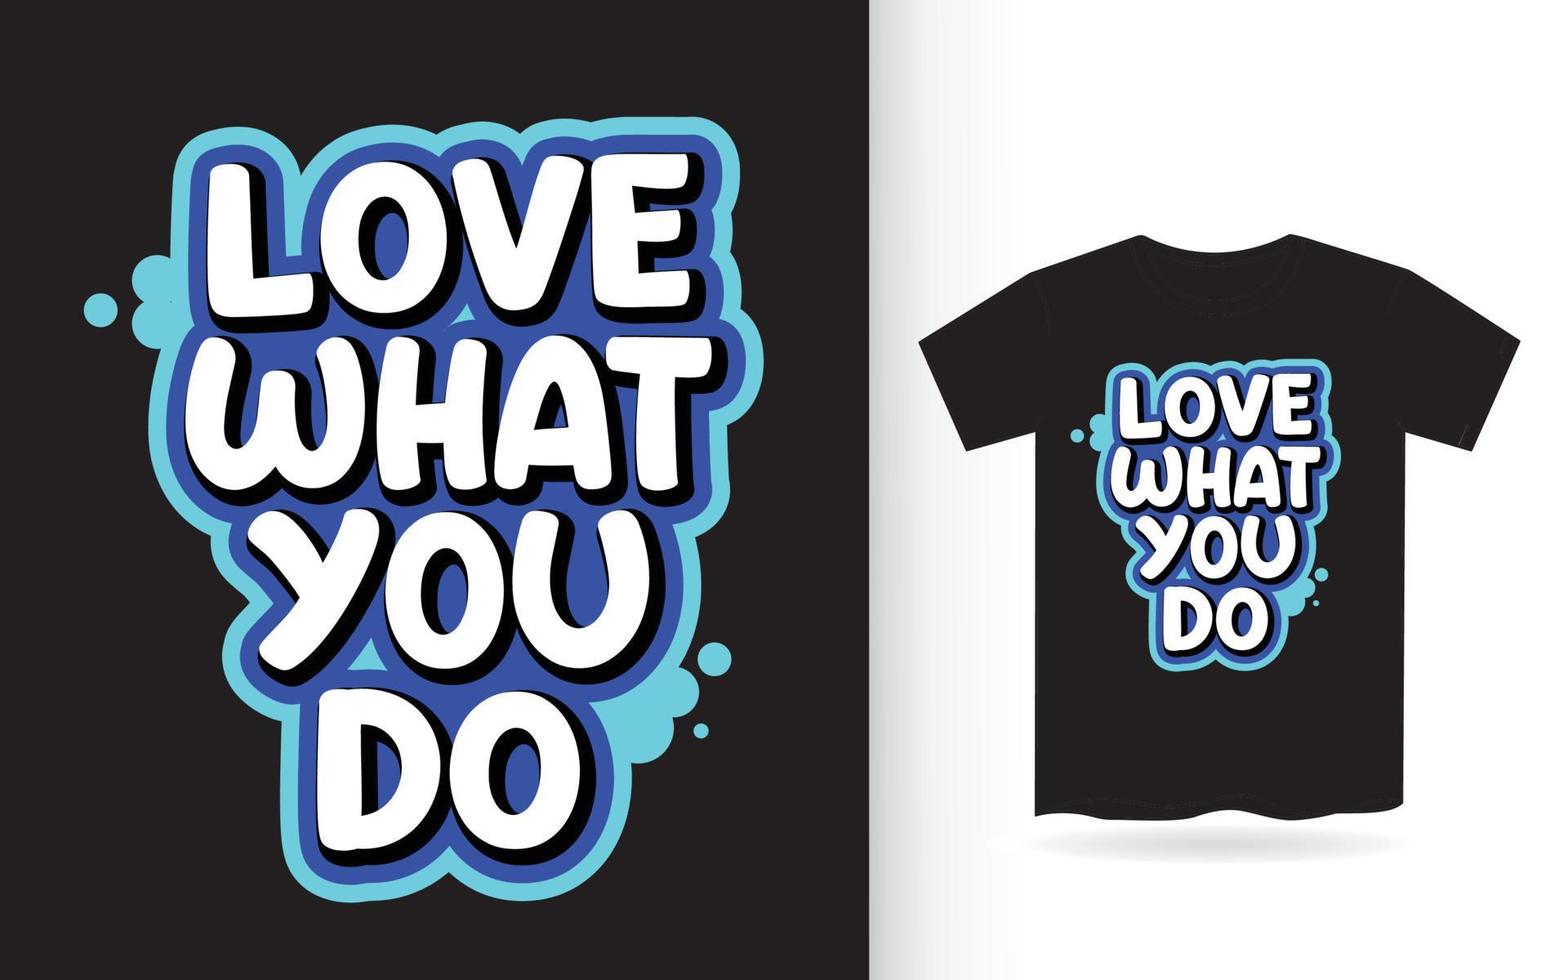 Love what you do motivational typography t shirt vector